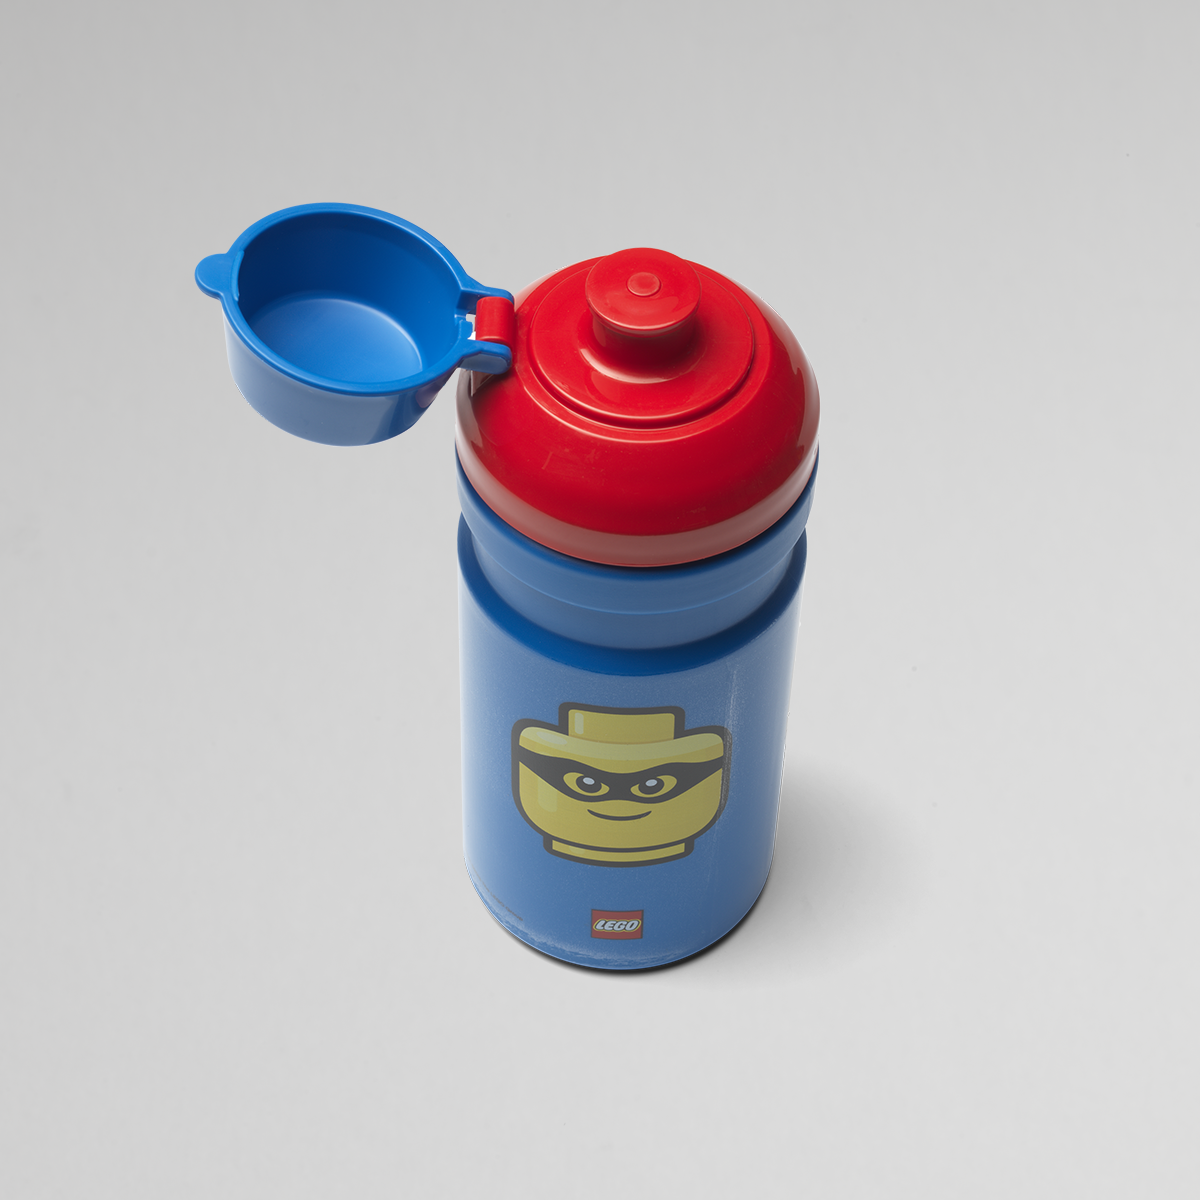 https://nh-g.com/wp-content/uploads/2022/05/4056-LEGO-Drinking-bottle-blue-red-Open.png